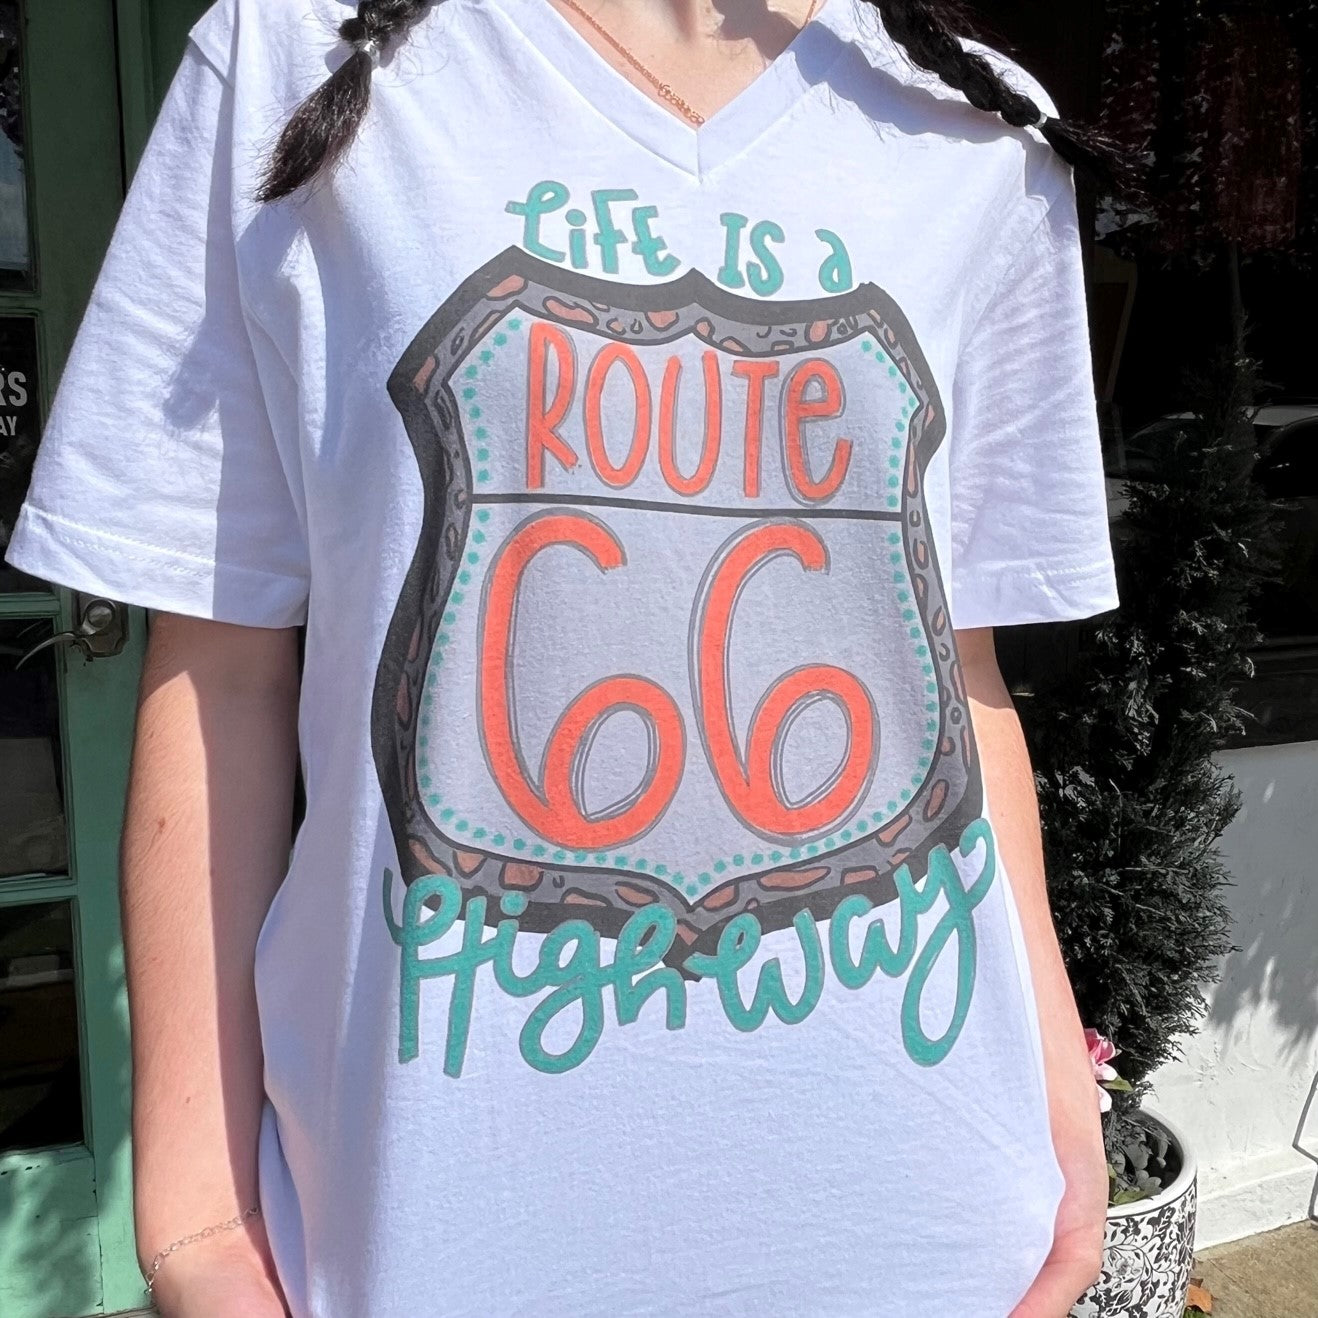 Route 66 Tee